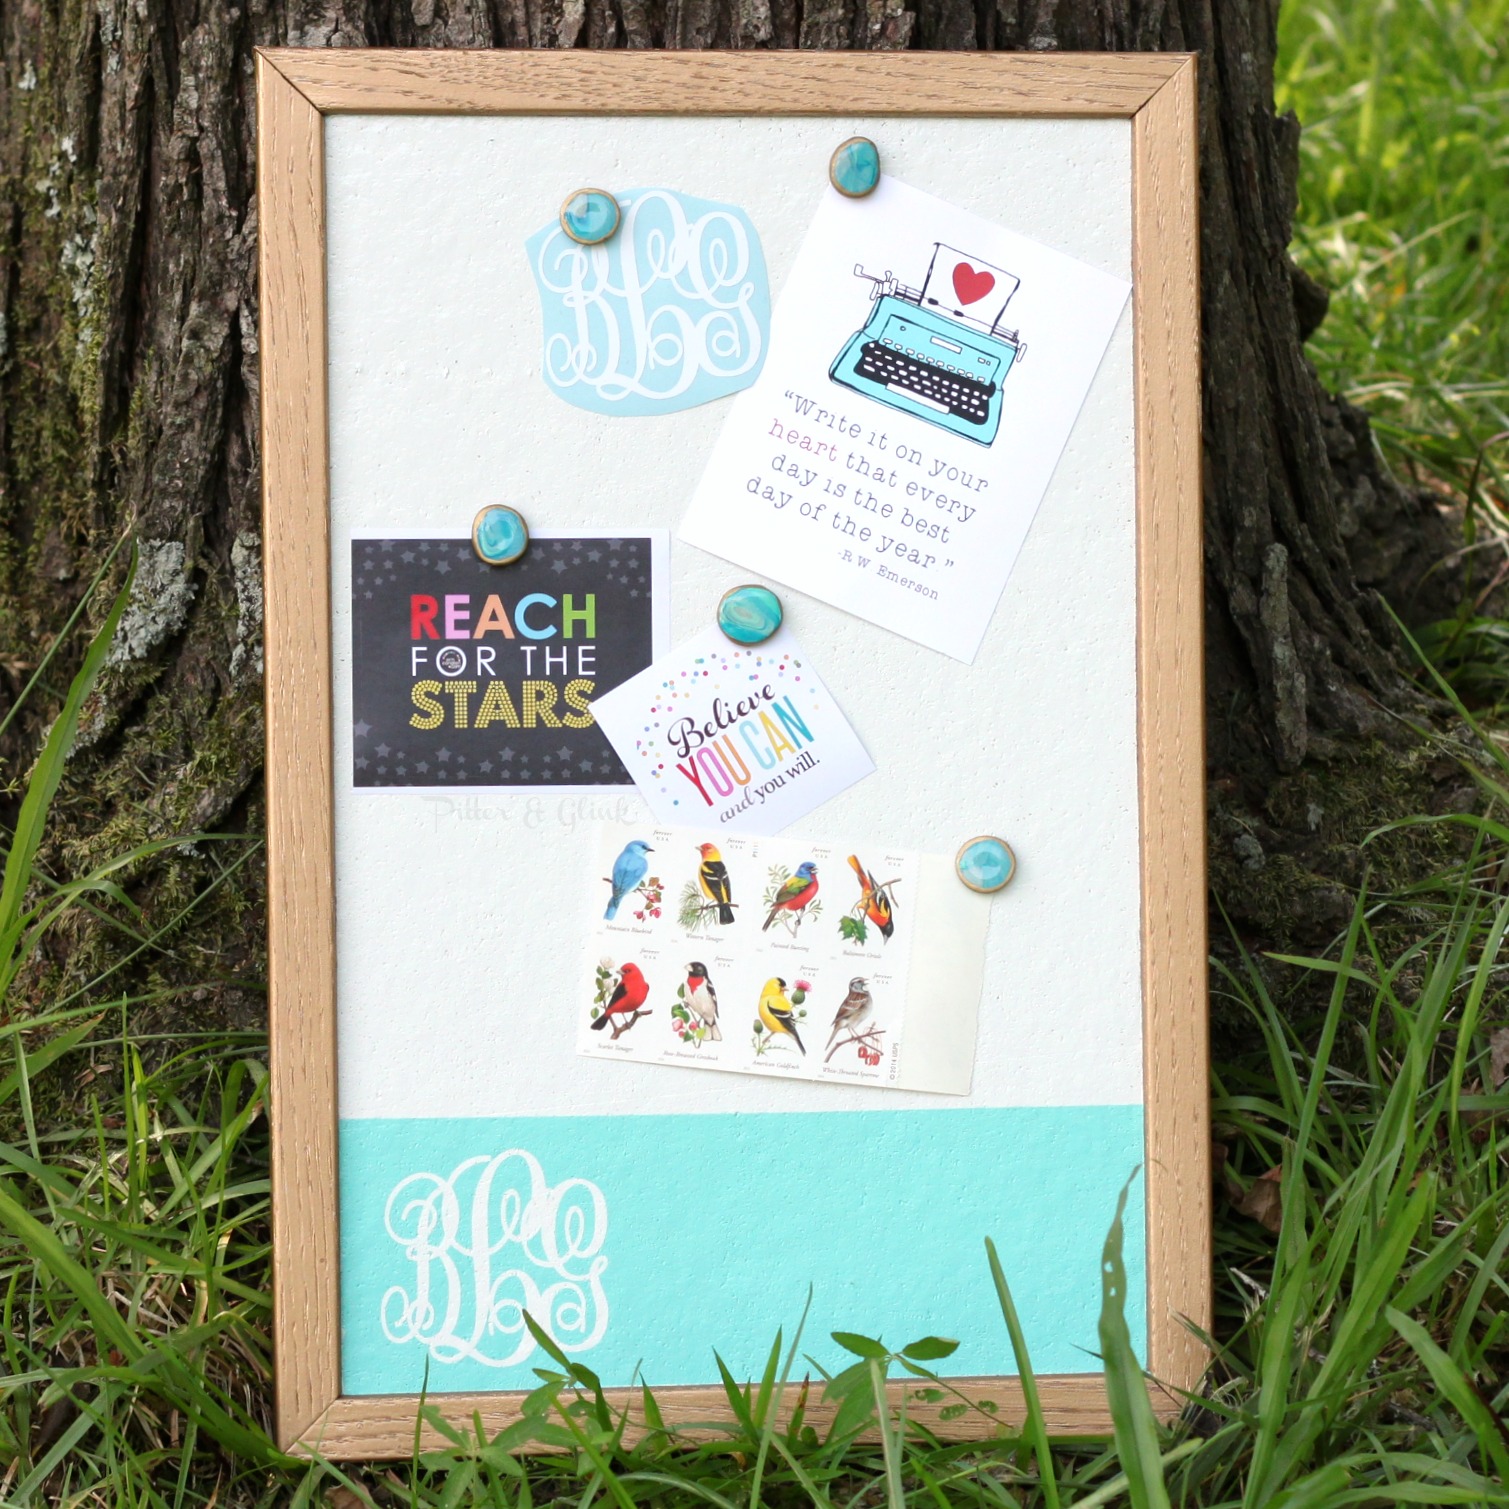 Makeover a plain memo board with spray paint and a vinyl monogram used as a reverse stencil. pitterandglink.com #monogram #Silhouette